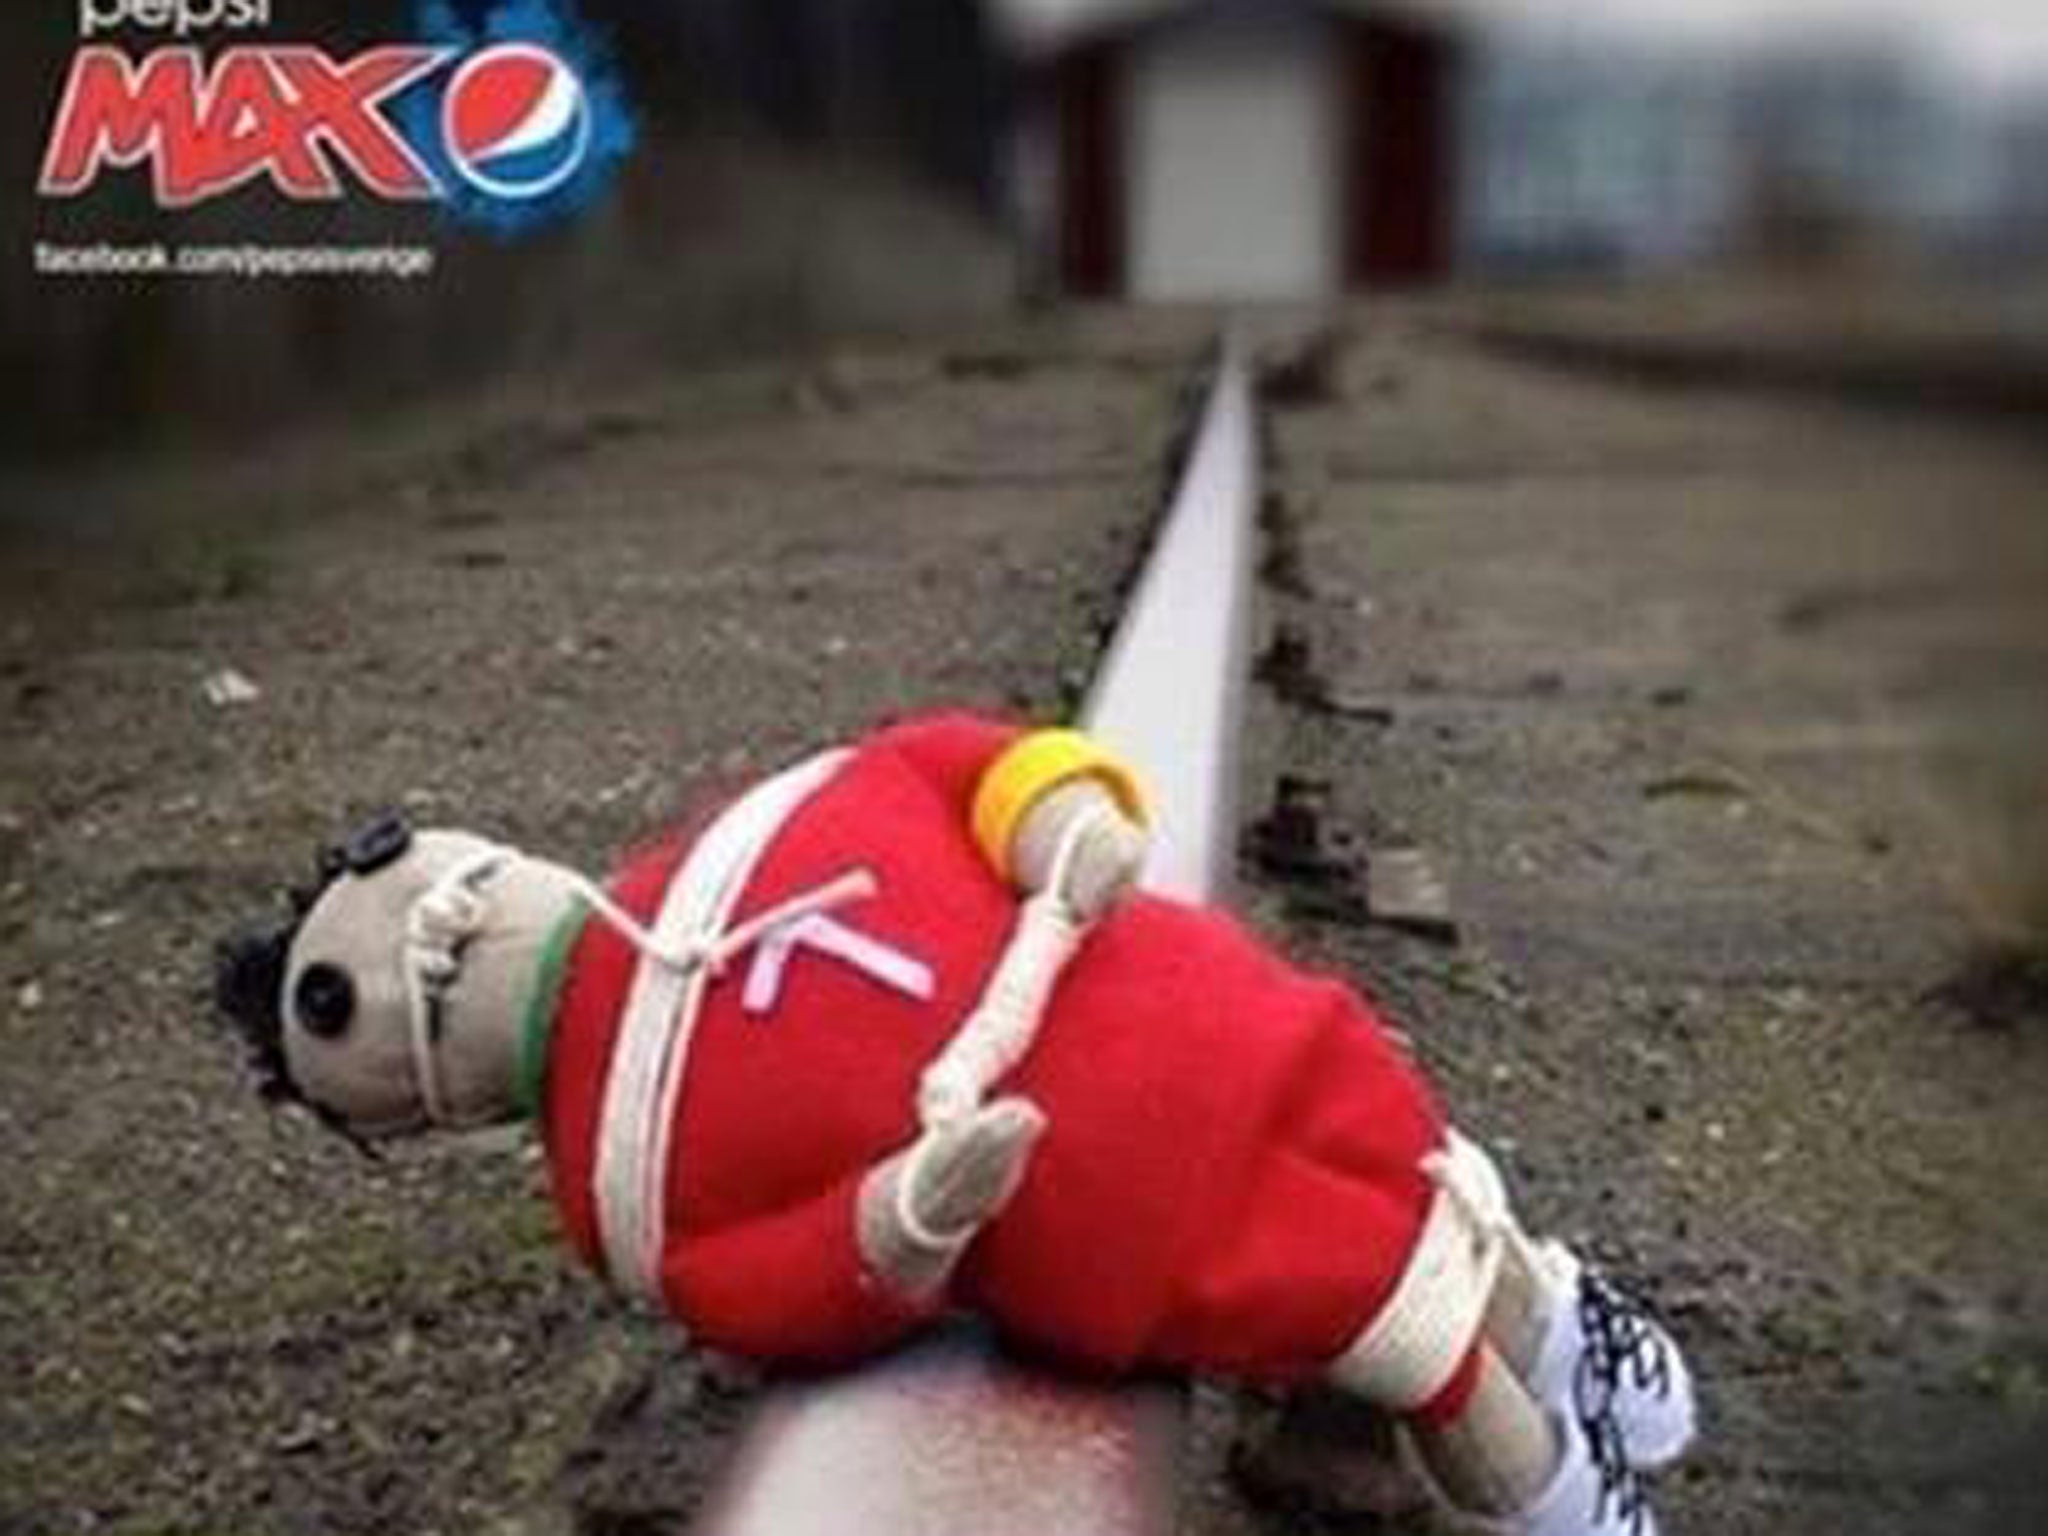 The viral shows Cristiano Ronaldo tied to a train track